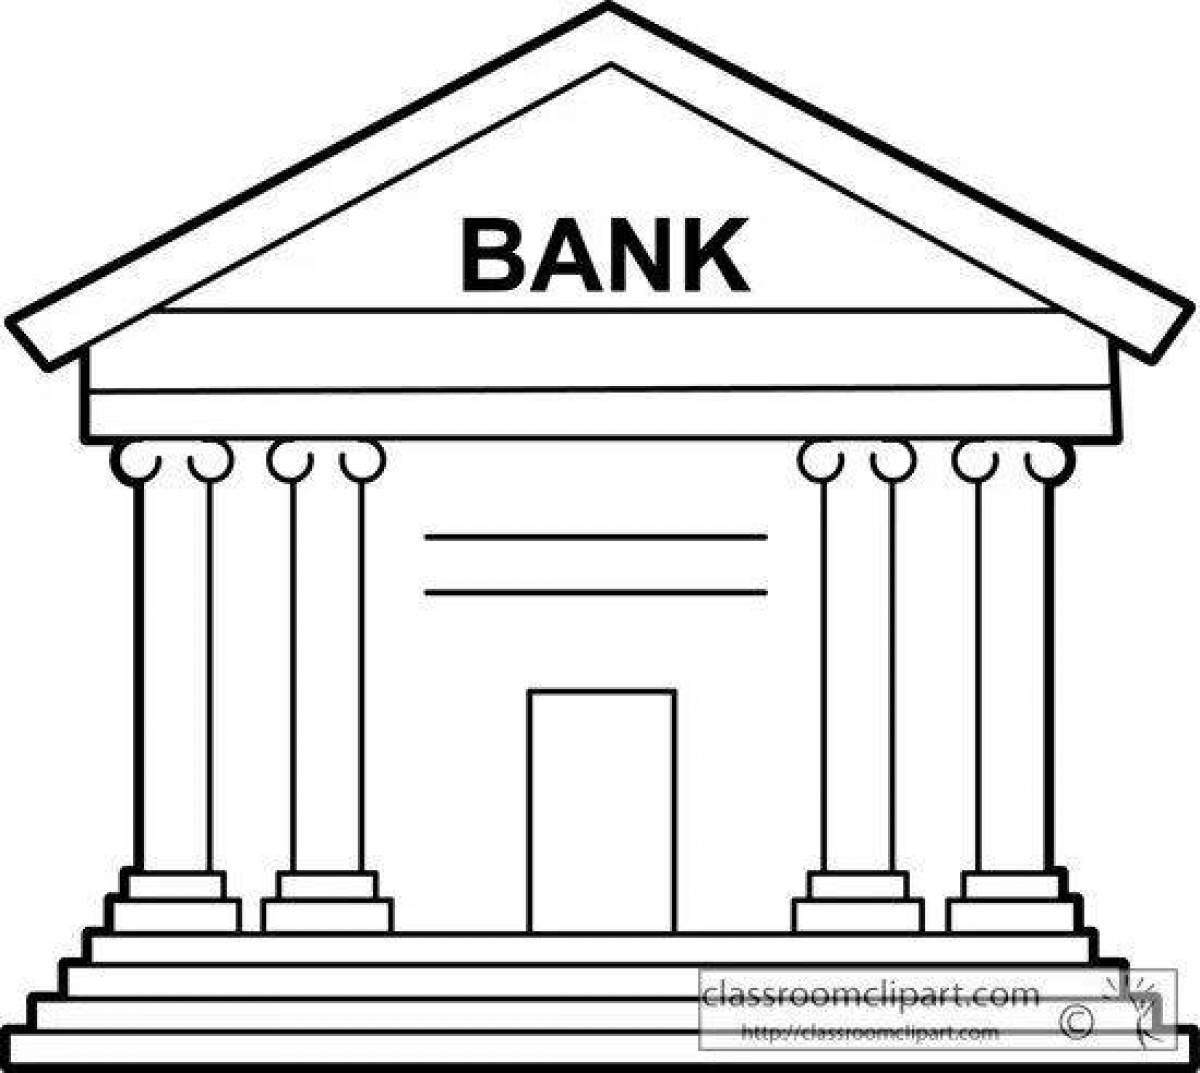 Playful bank coloring page